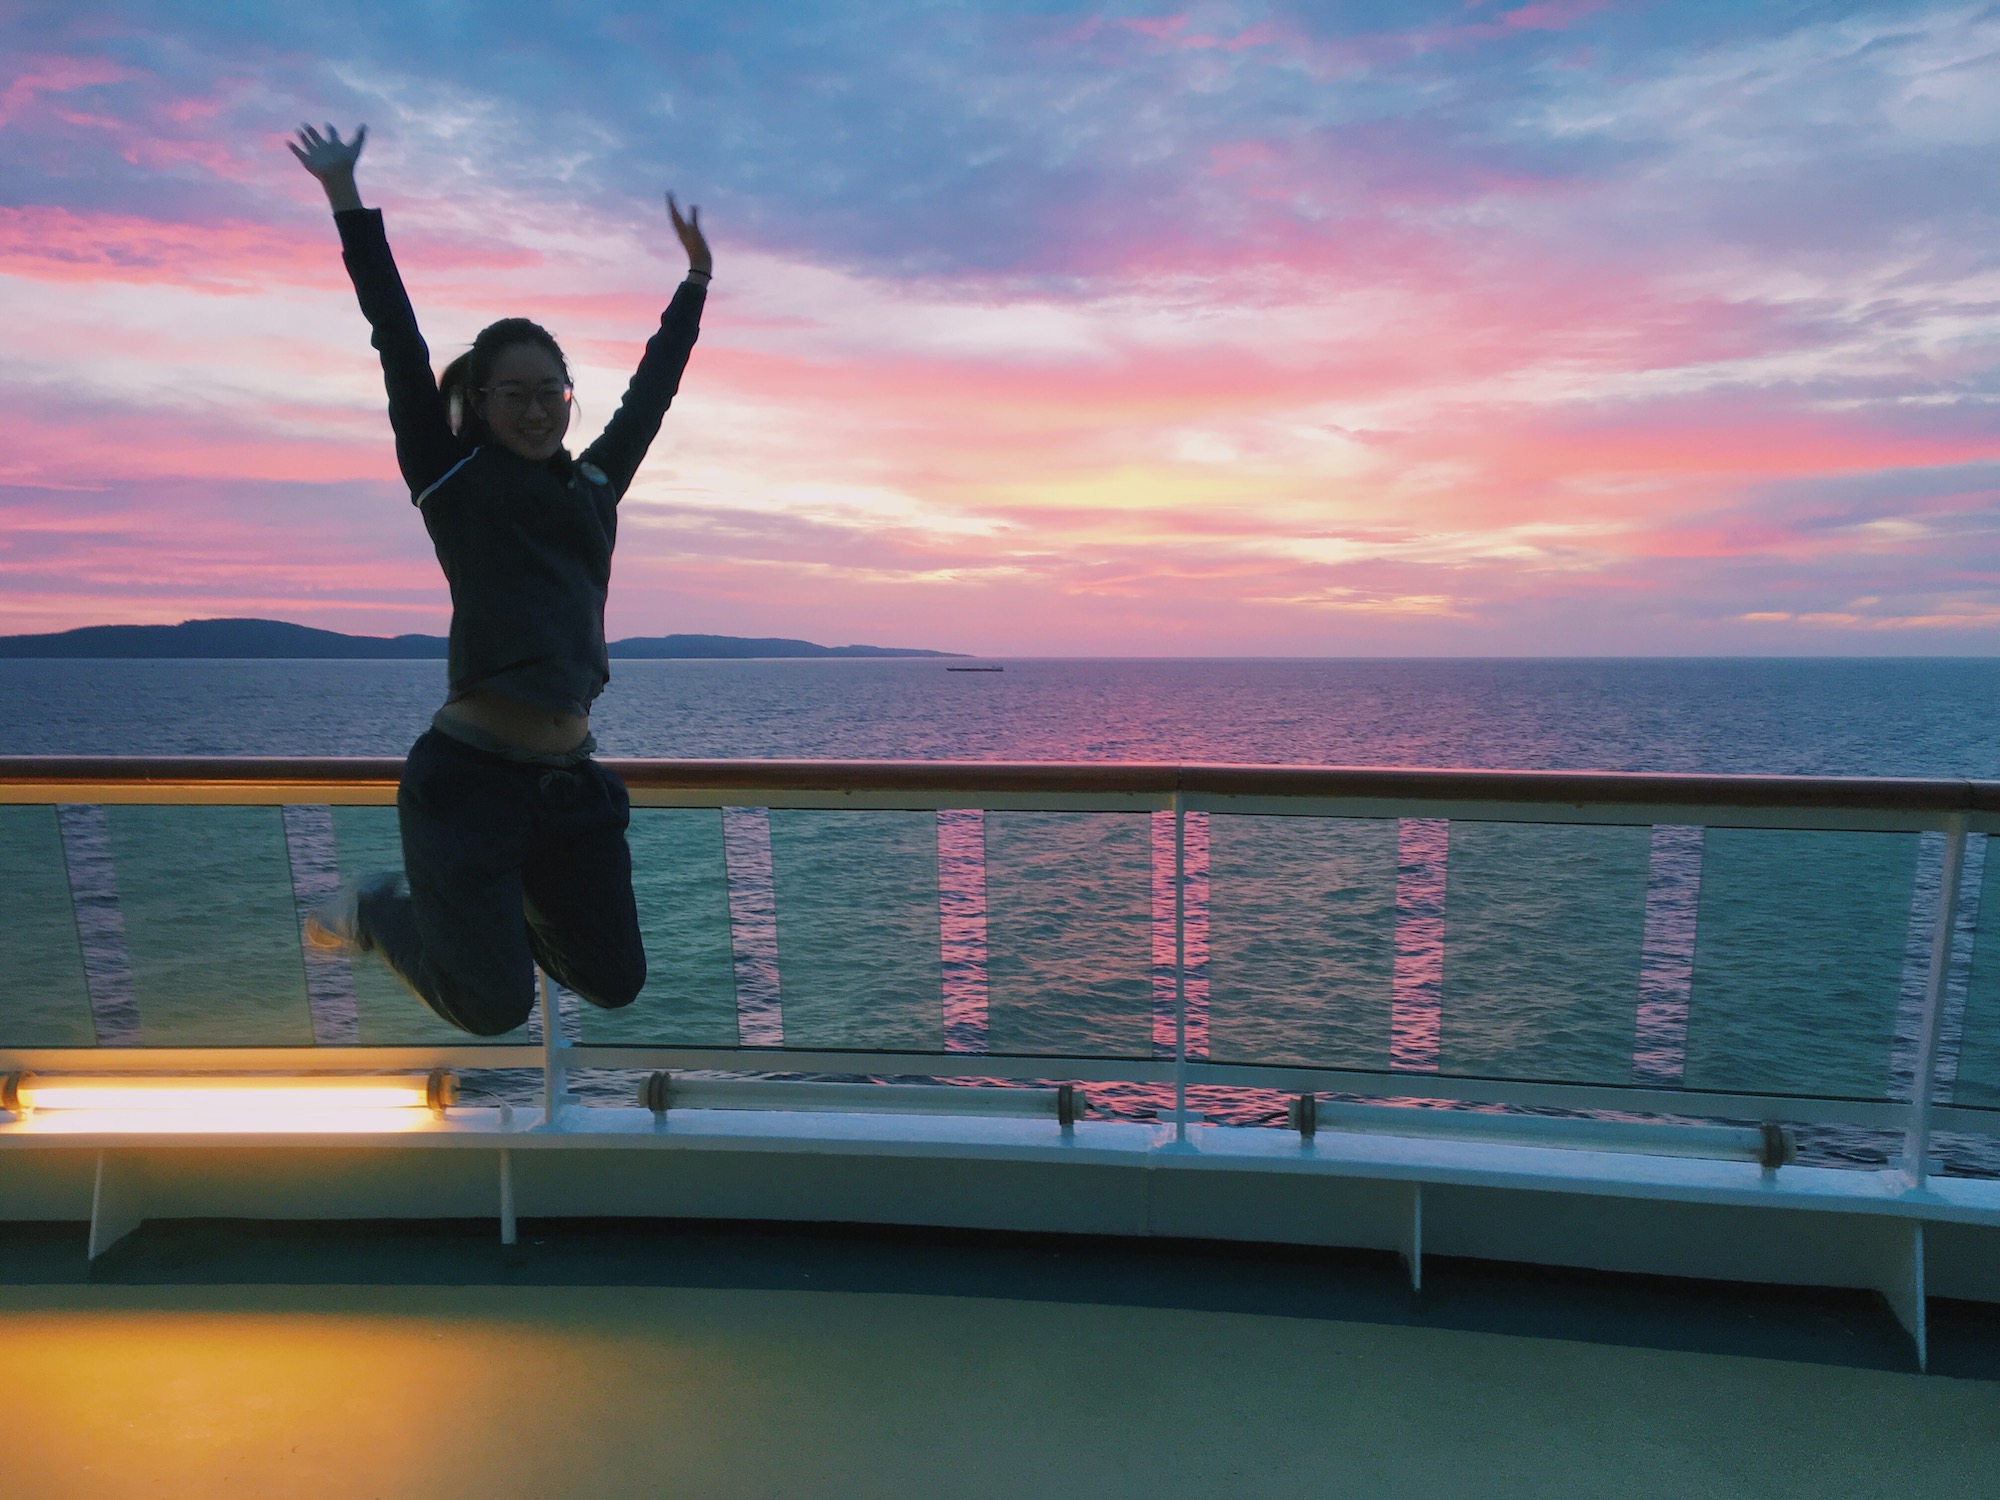 One of the best jobs that travel with no experience required: cruise ship worker. A female staffer jumps on the deck of a ship to pose during sunset